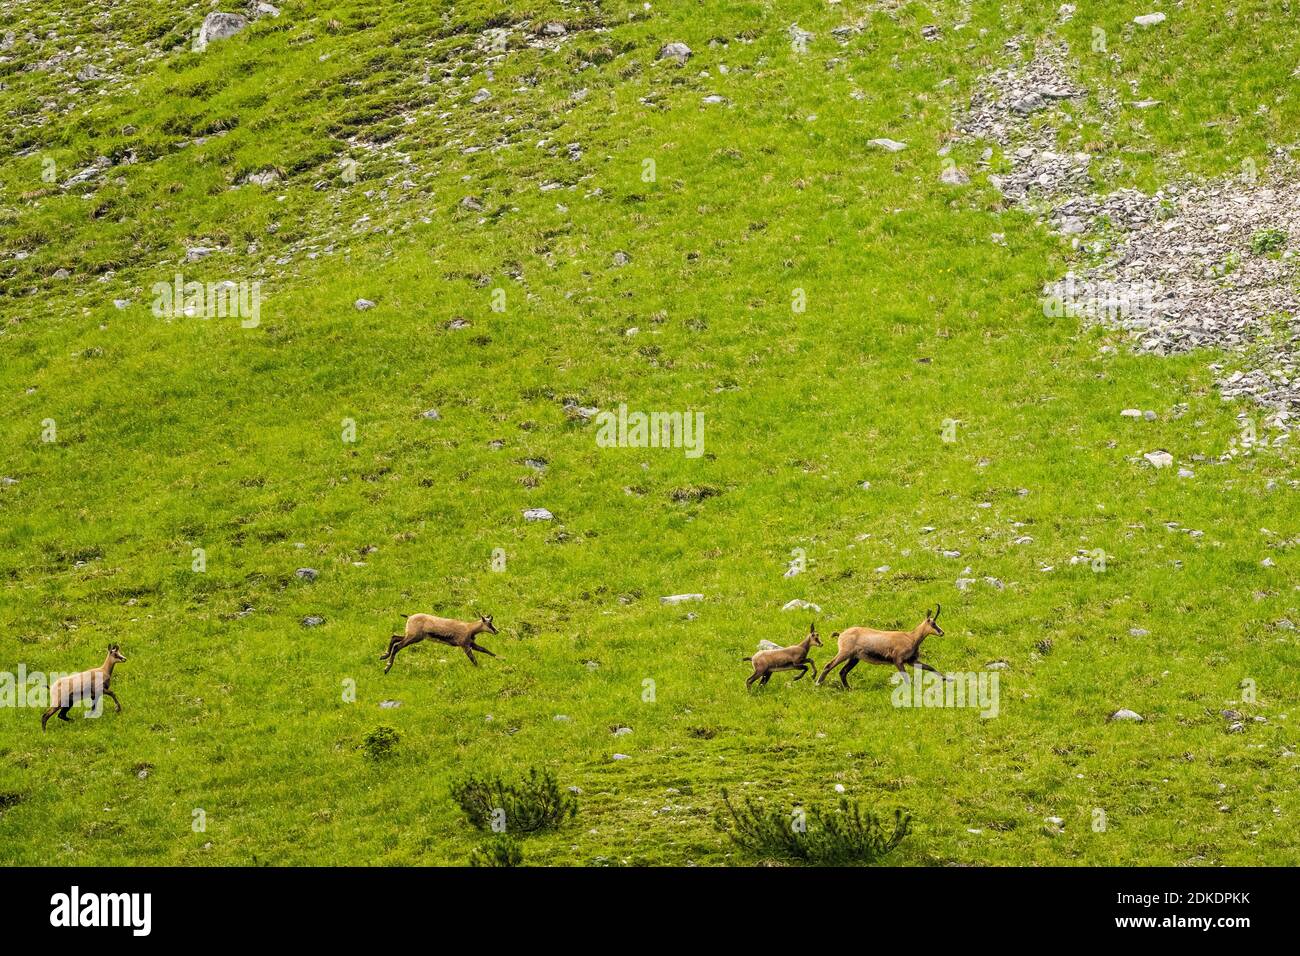 A group of chamois with young animals runs along a mountain slope Stock Photo